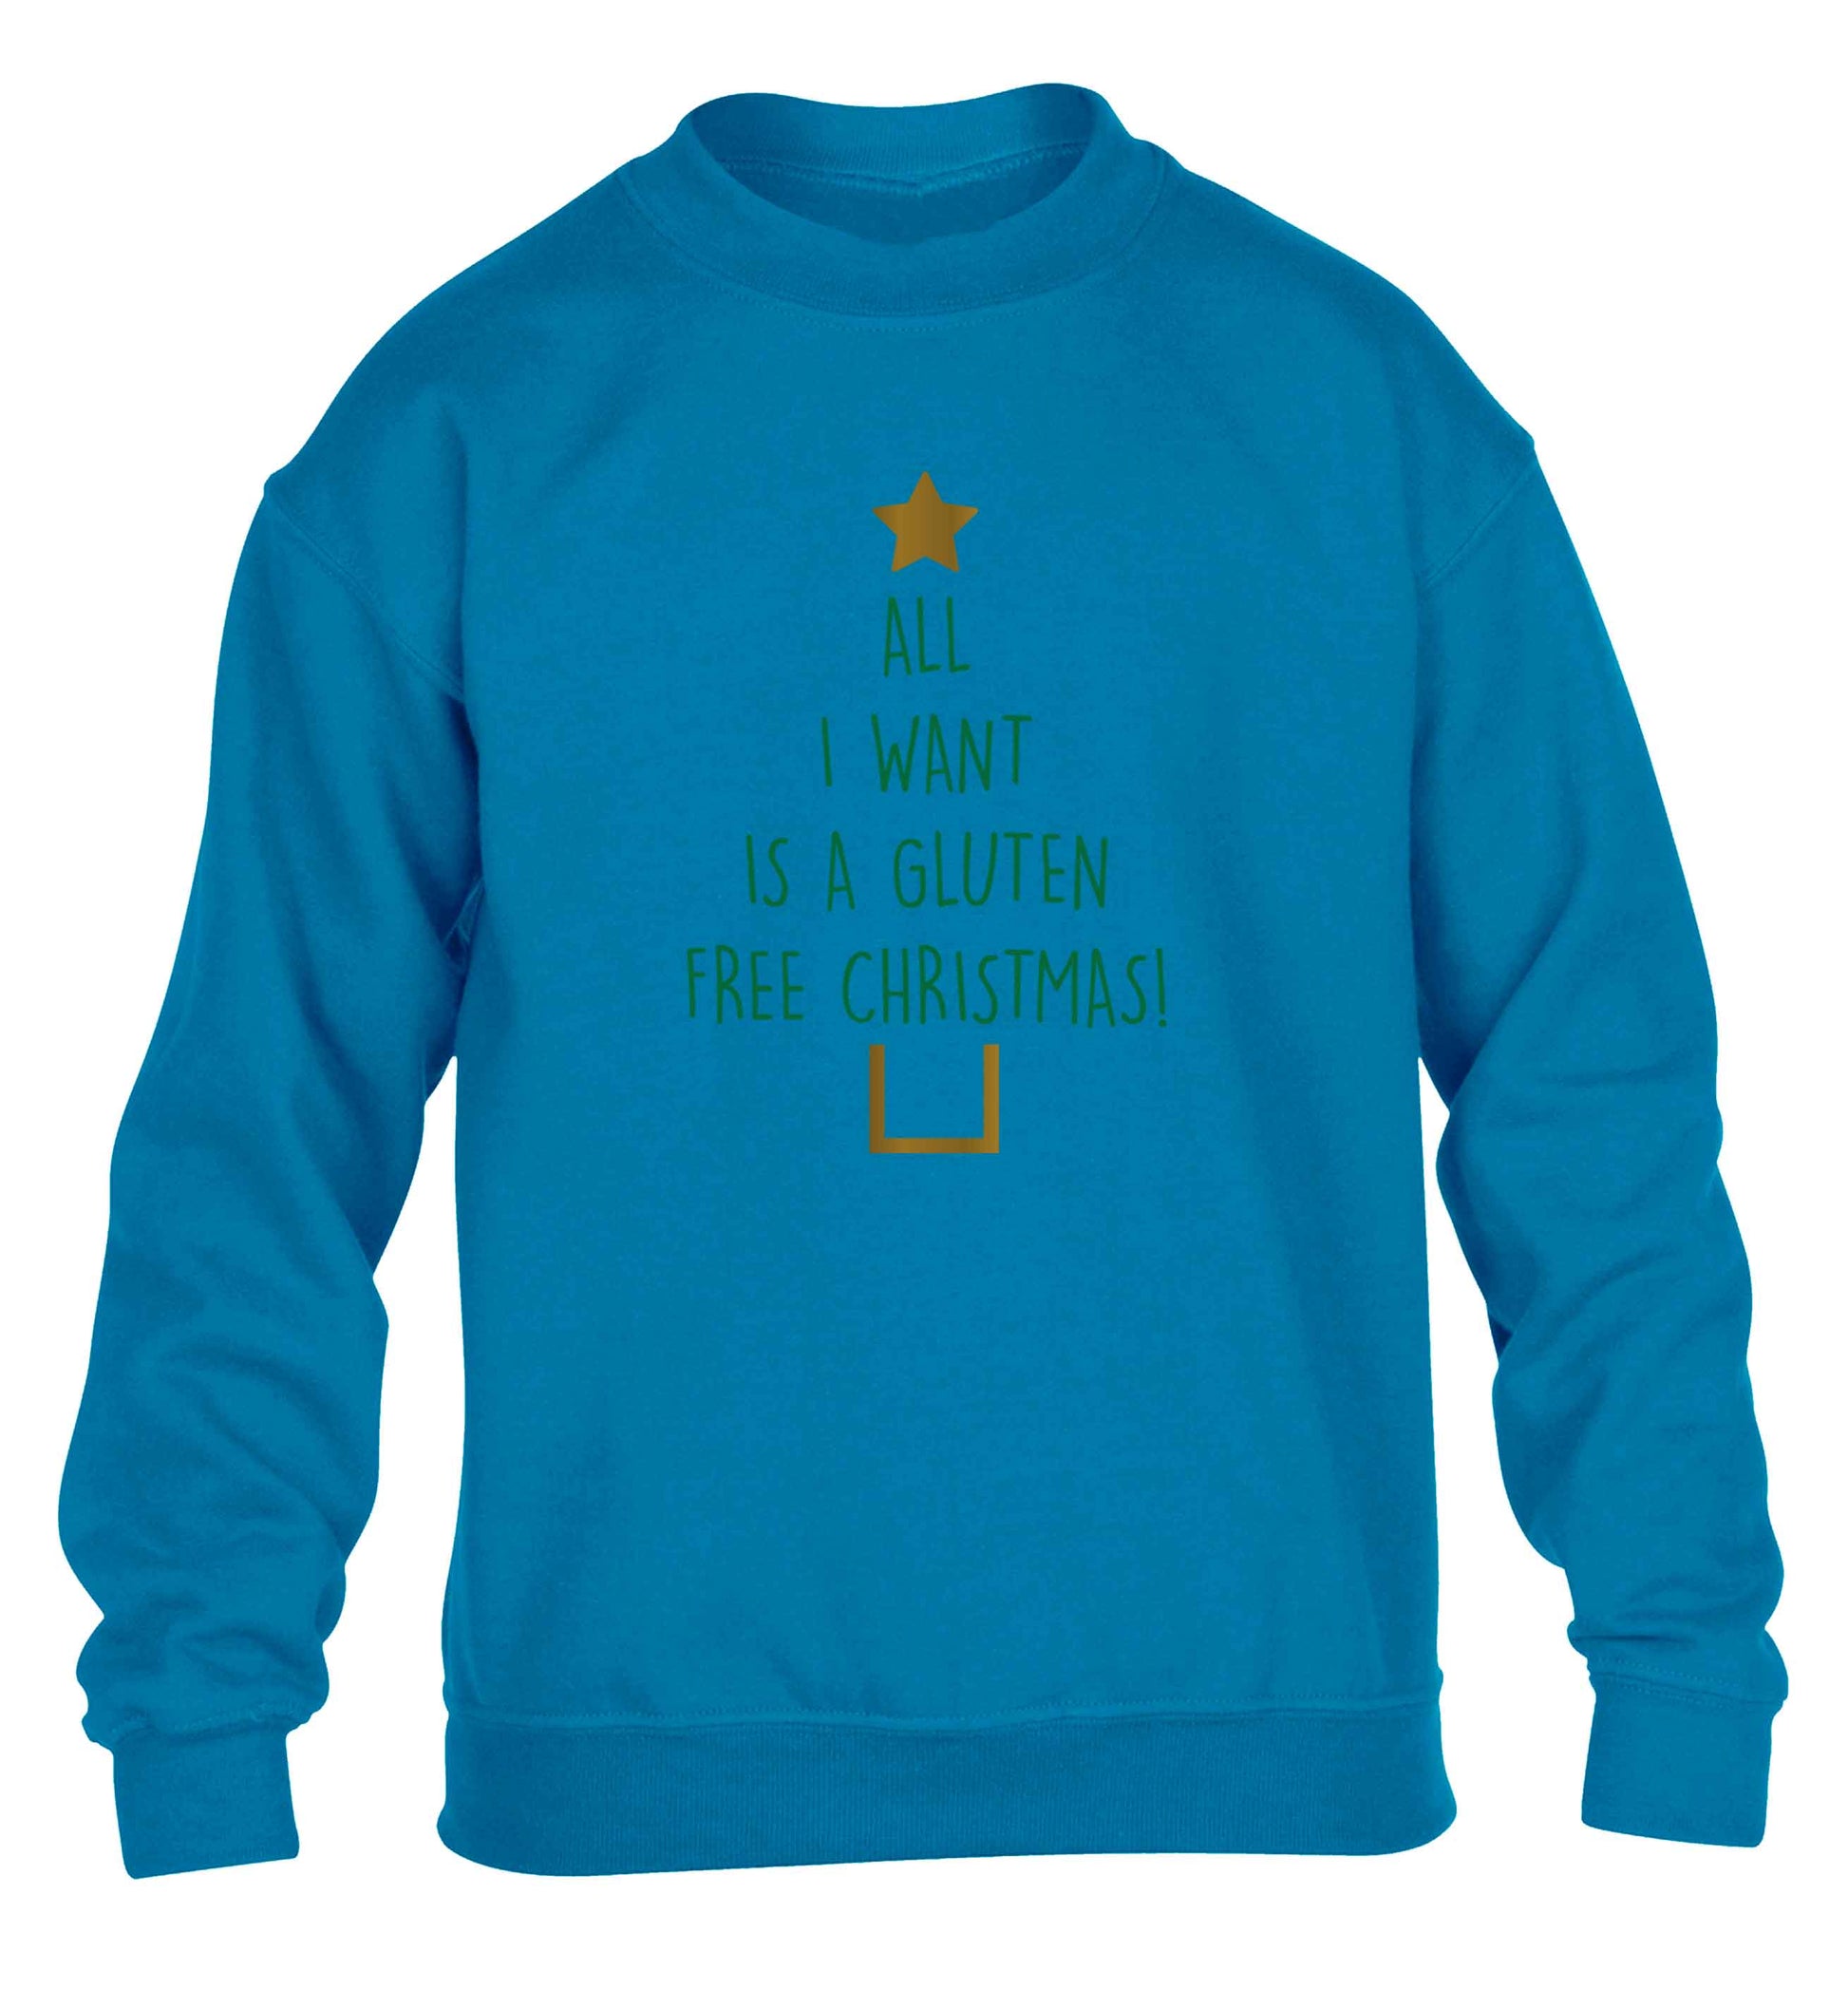 All I want is a gluten free Christmas children's blue sweater 12-13 Years